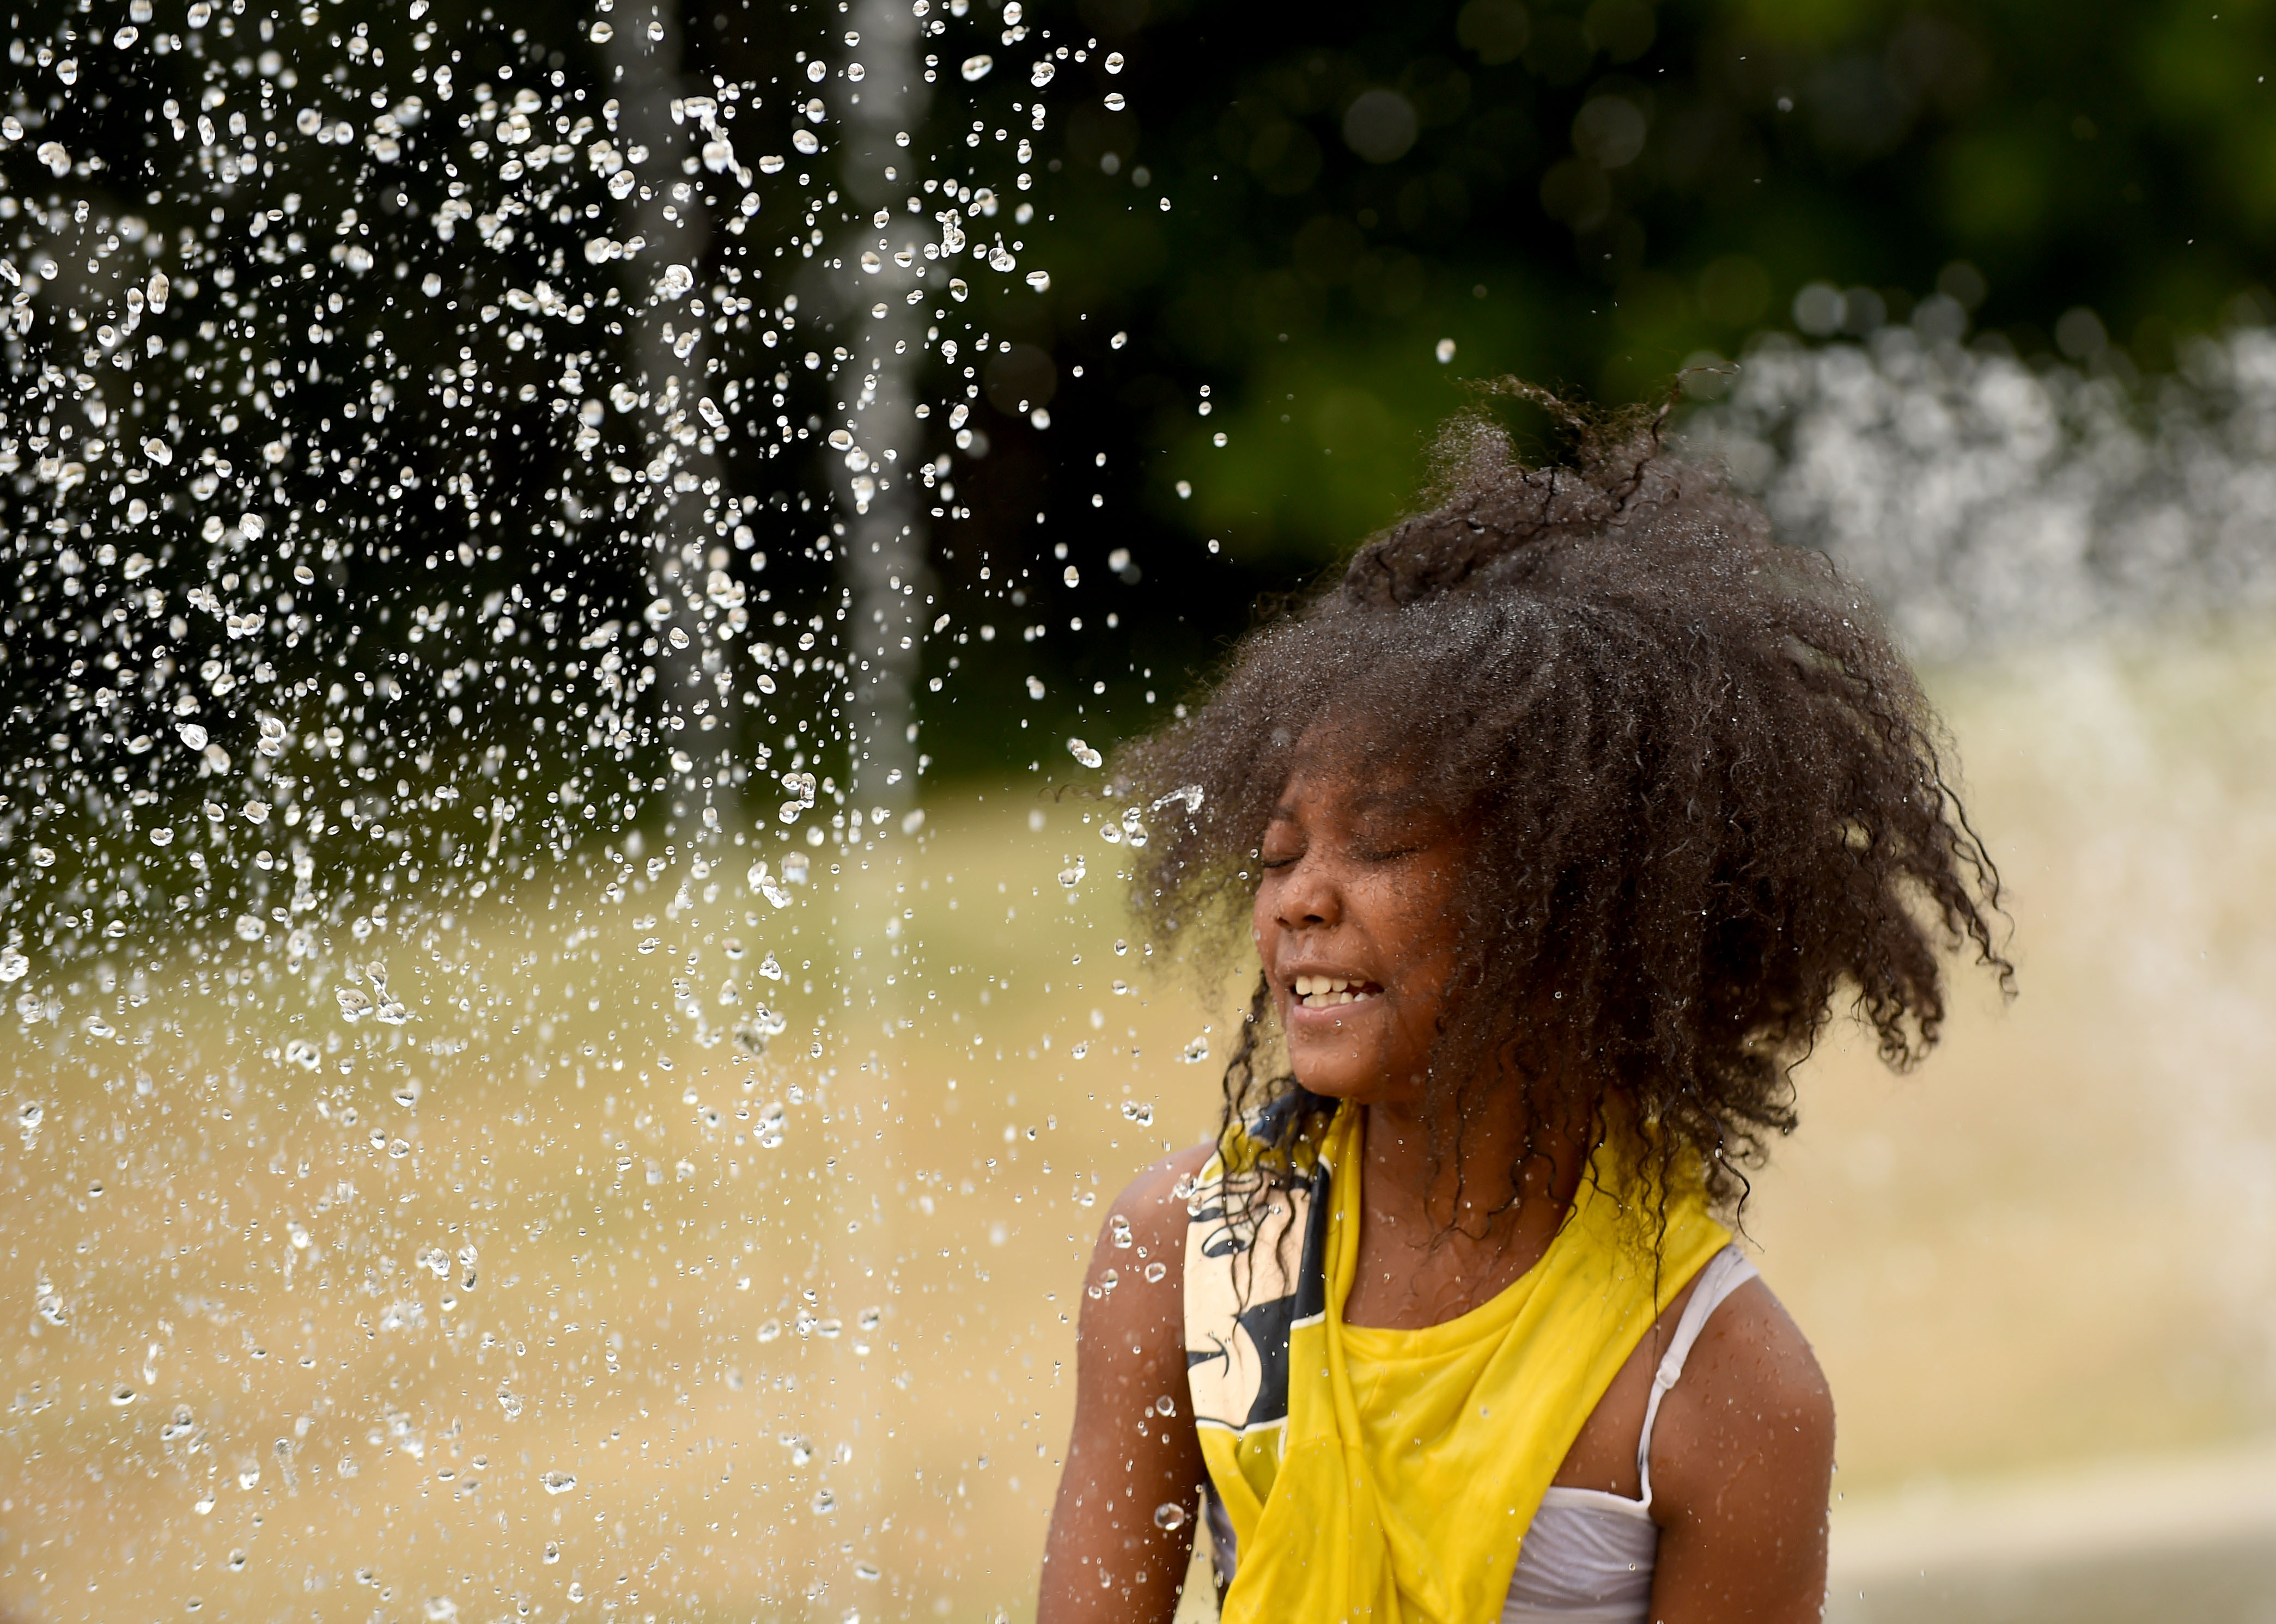 People are still looking for a way to cool down during a heat spell in Syracuse, July 8, 2020. Zayonna Crawford 10 yrs old  at the spray area at Onondaga Park.  Dennis Nett | dnett@syracuse.com